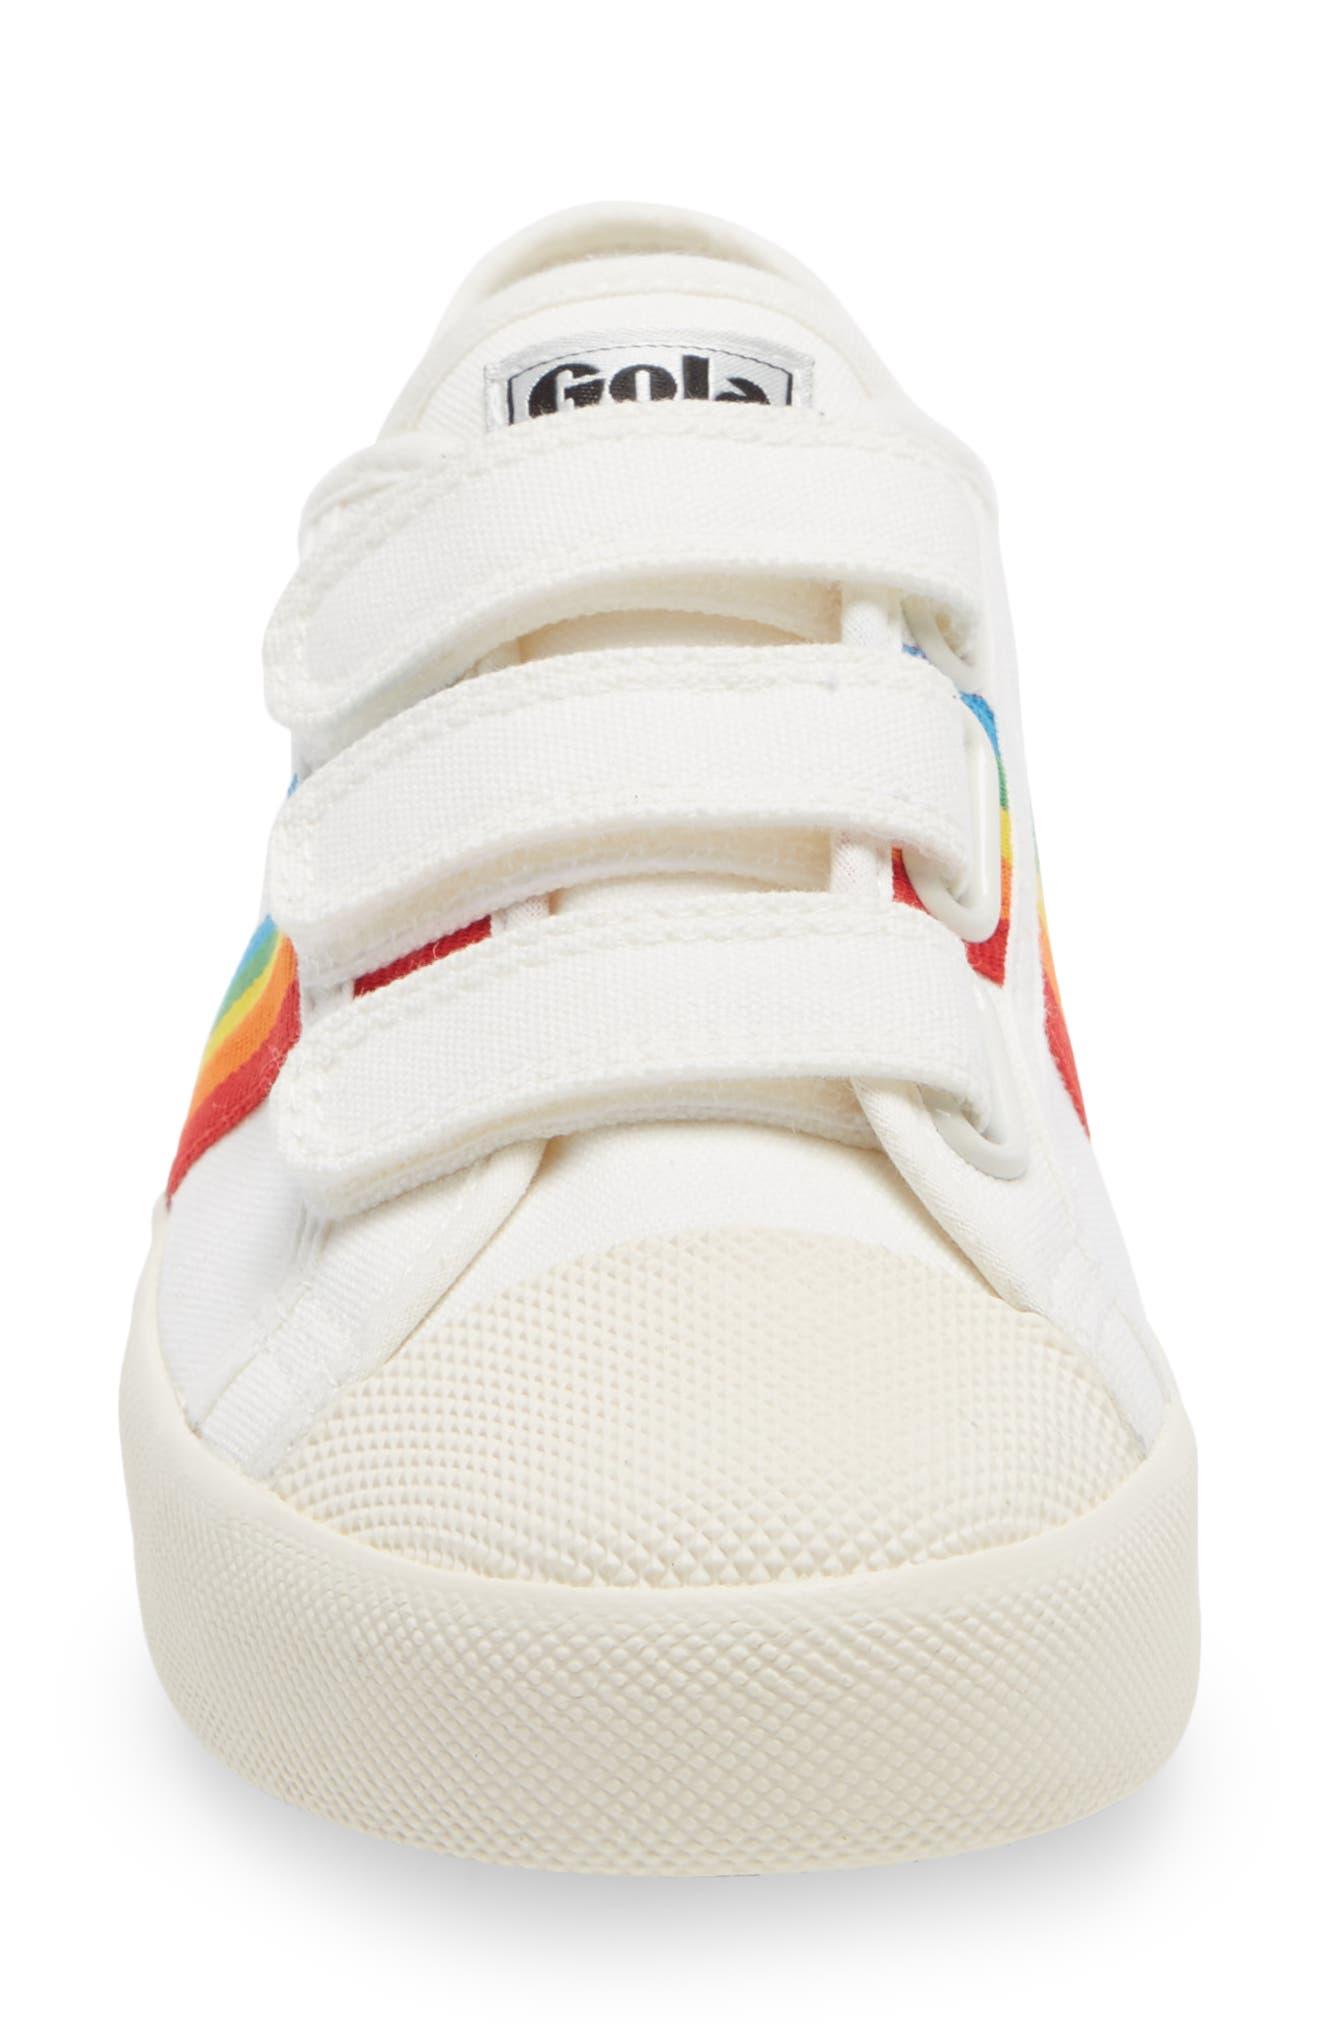 Gola Coaster Rainbow Sneaker in Natural | Lyst